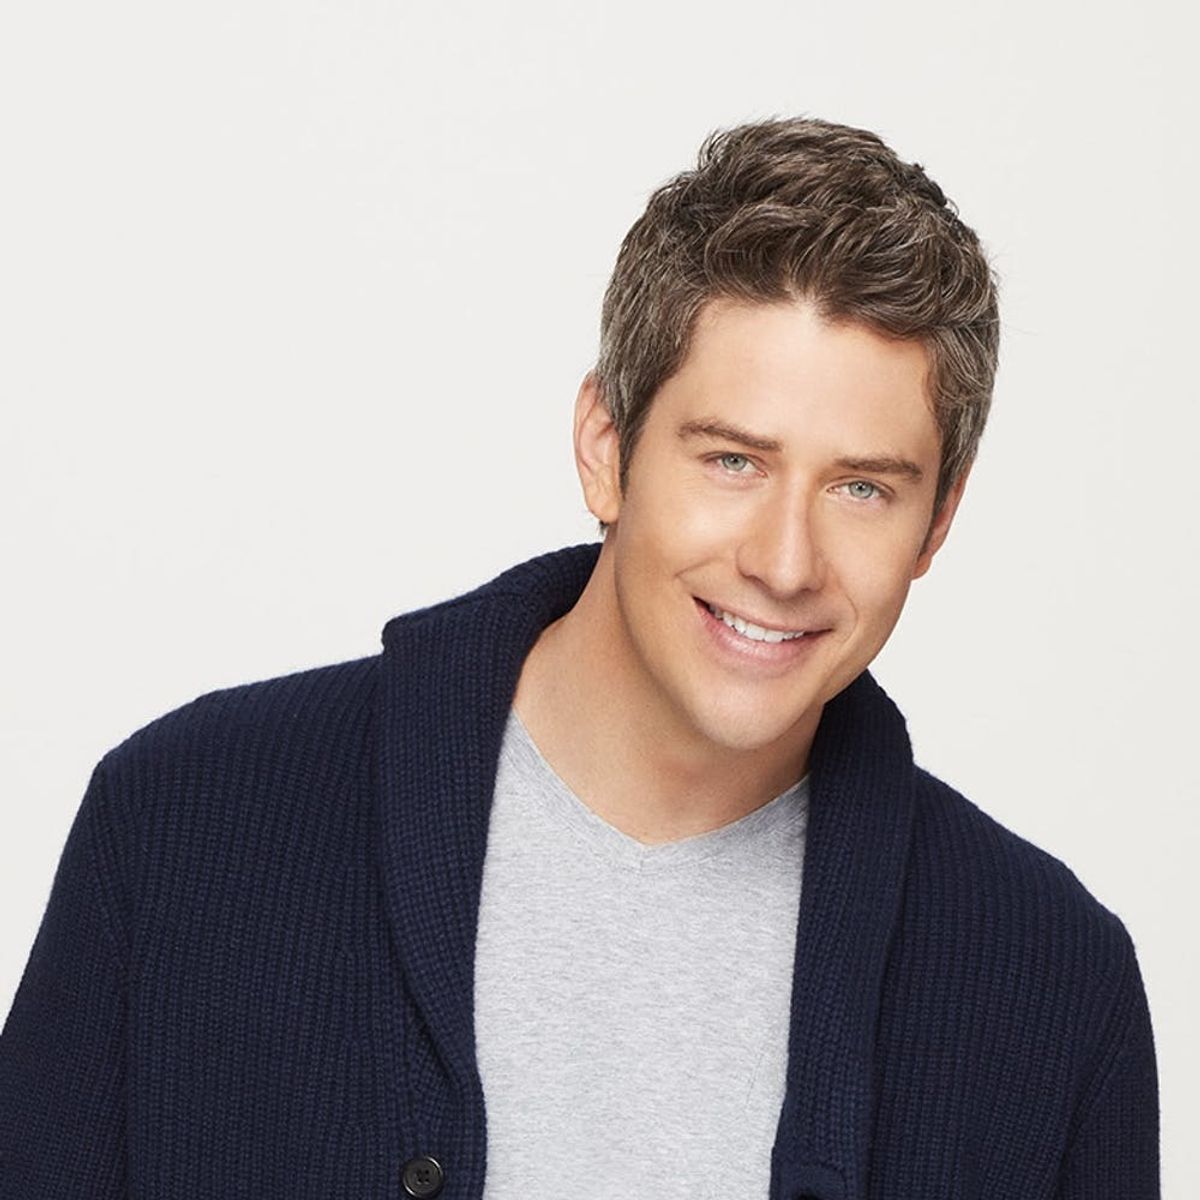 ‘Bachelor’ Arie Luyendyk Jr. Just Shared a Spoiler About His Season